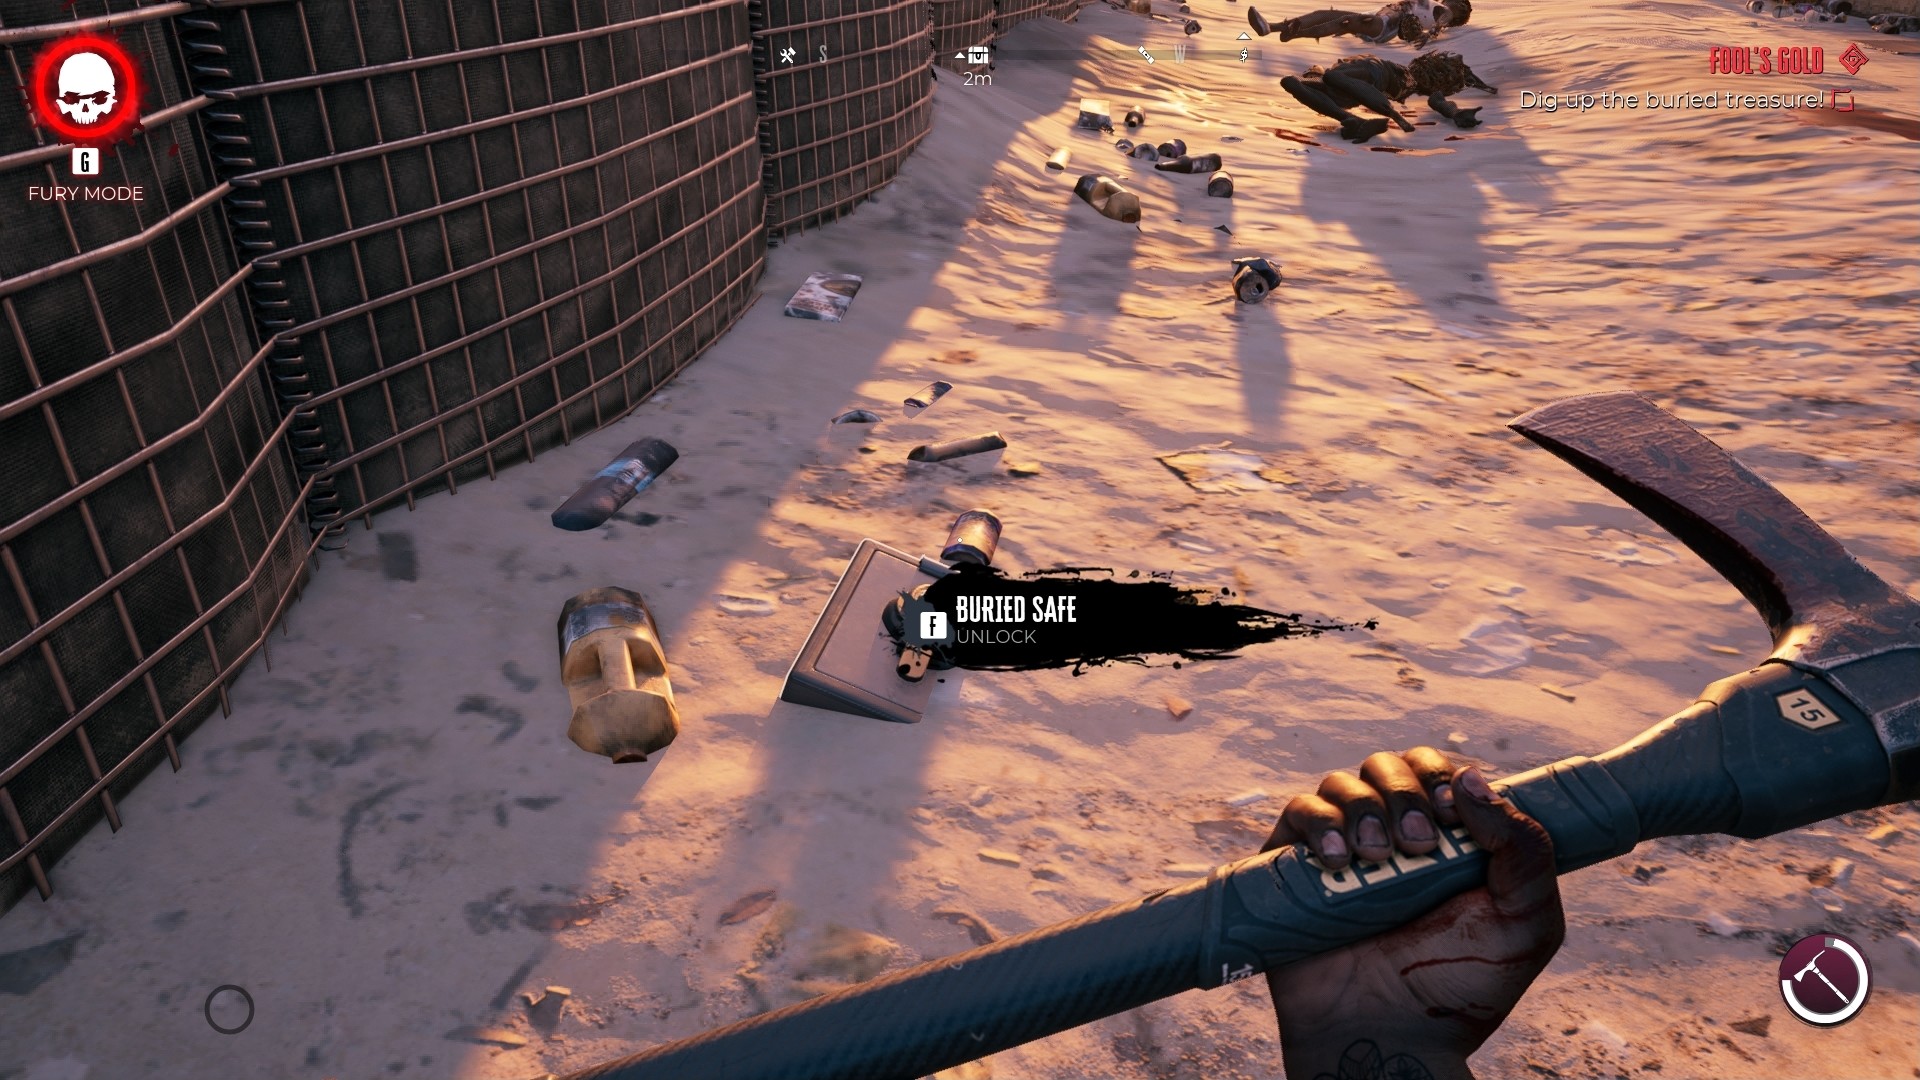 Dead Island 2 screenshot showing a safe buried under the sand, with some dead zombies in the background and a lot of litter lining the ground.